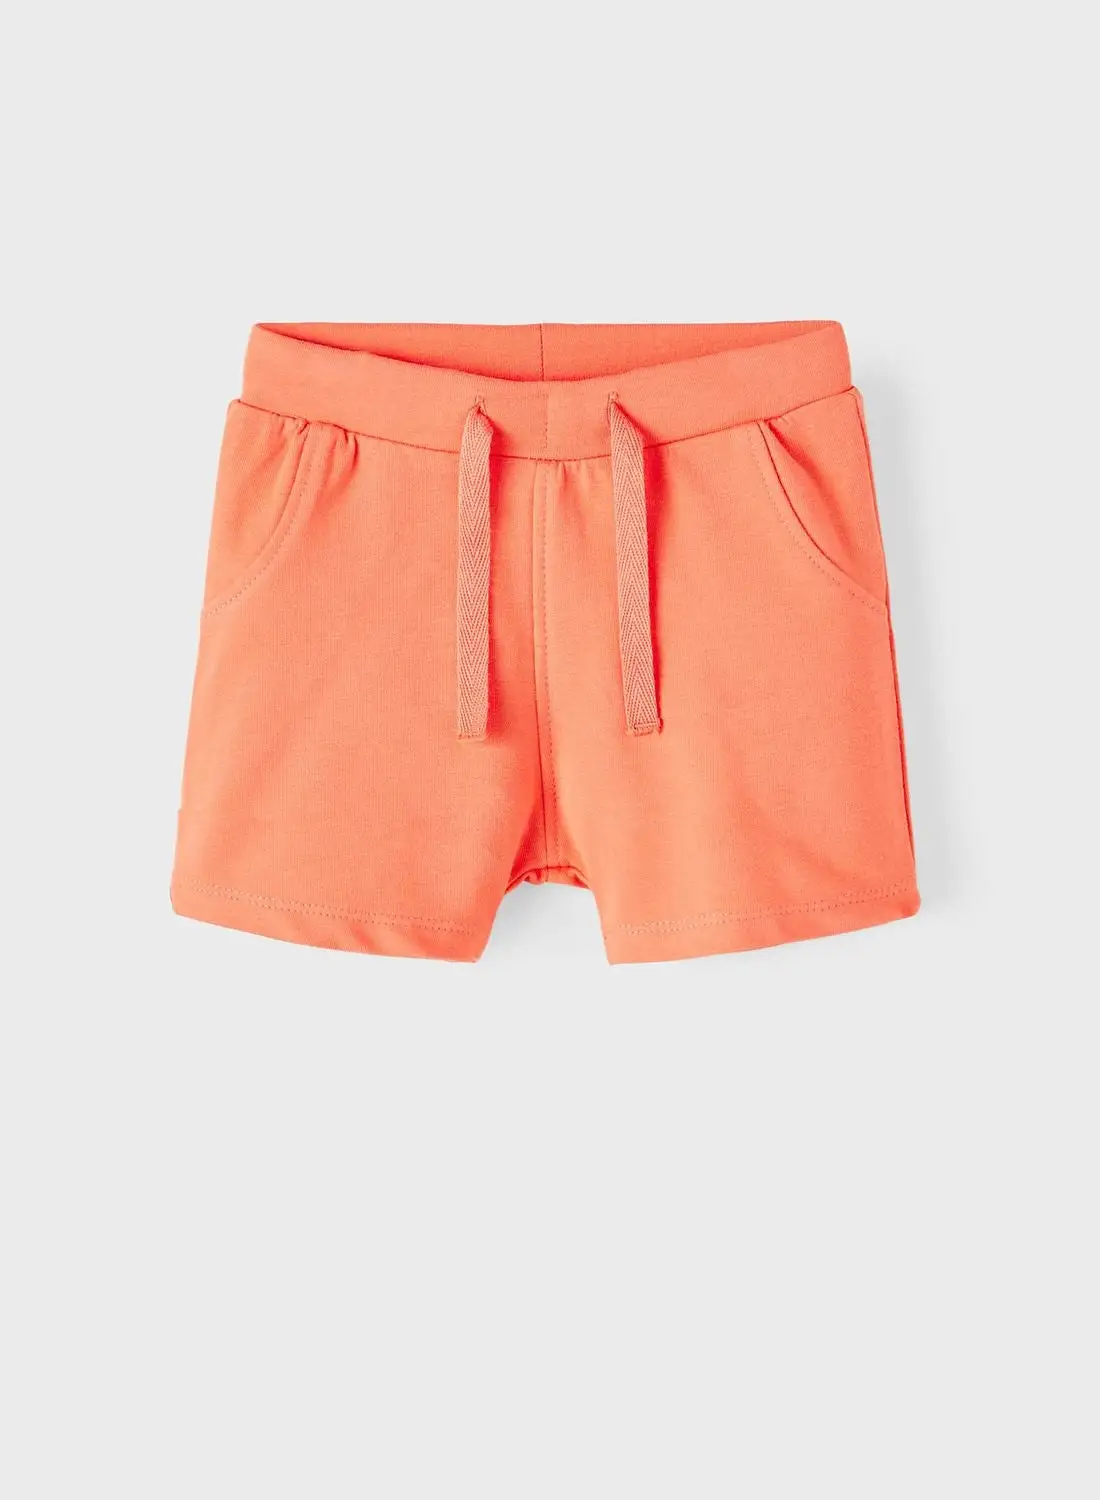 NAME IT Kids Essential Shorts